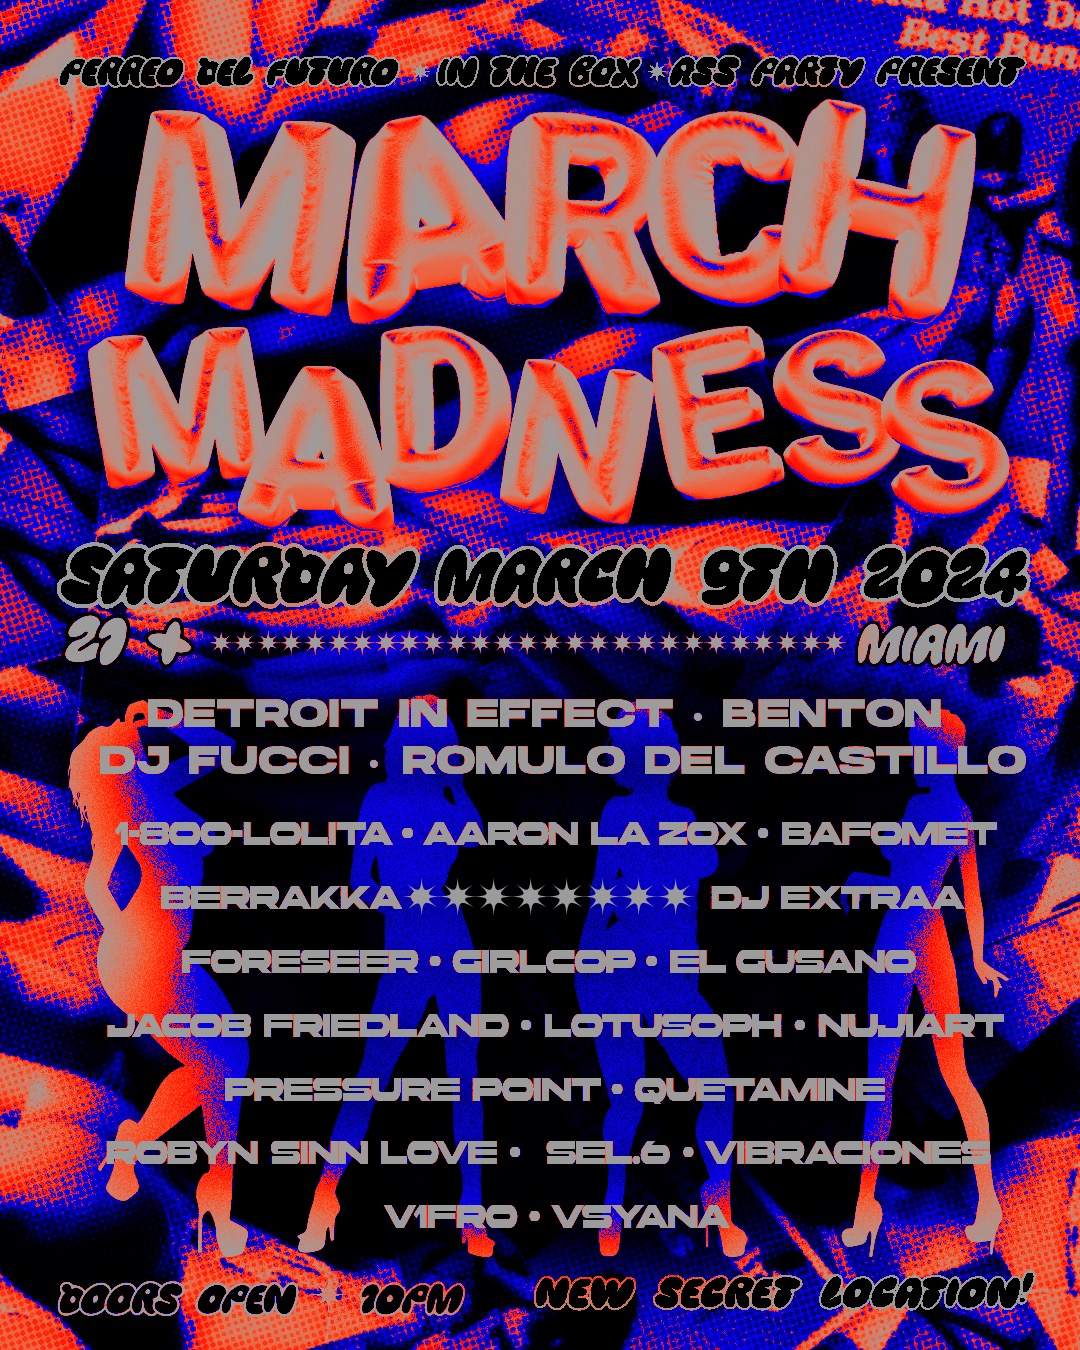 March Madness: Detroit In Effect, Dj Fucci, and 20+ other local artists - Página frontal